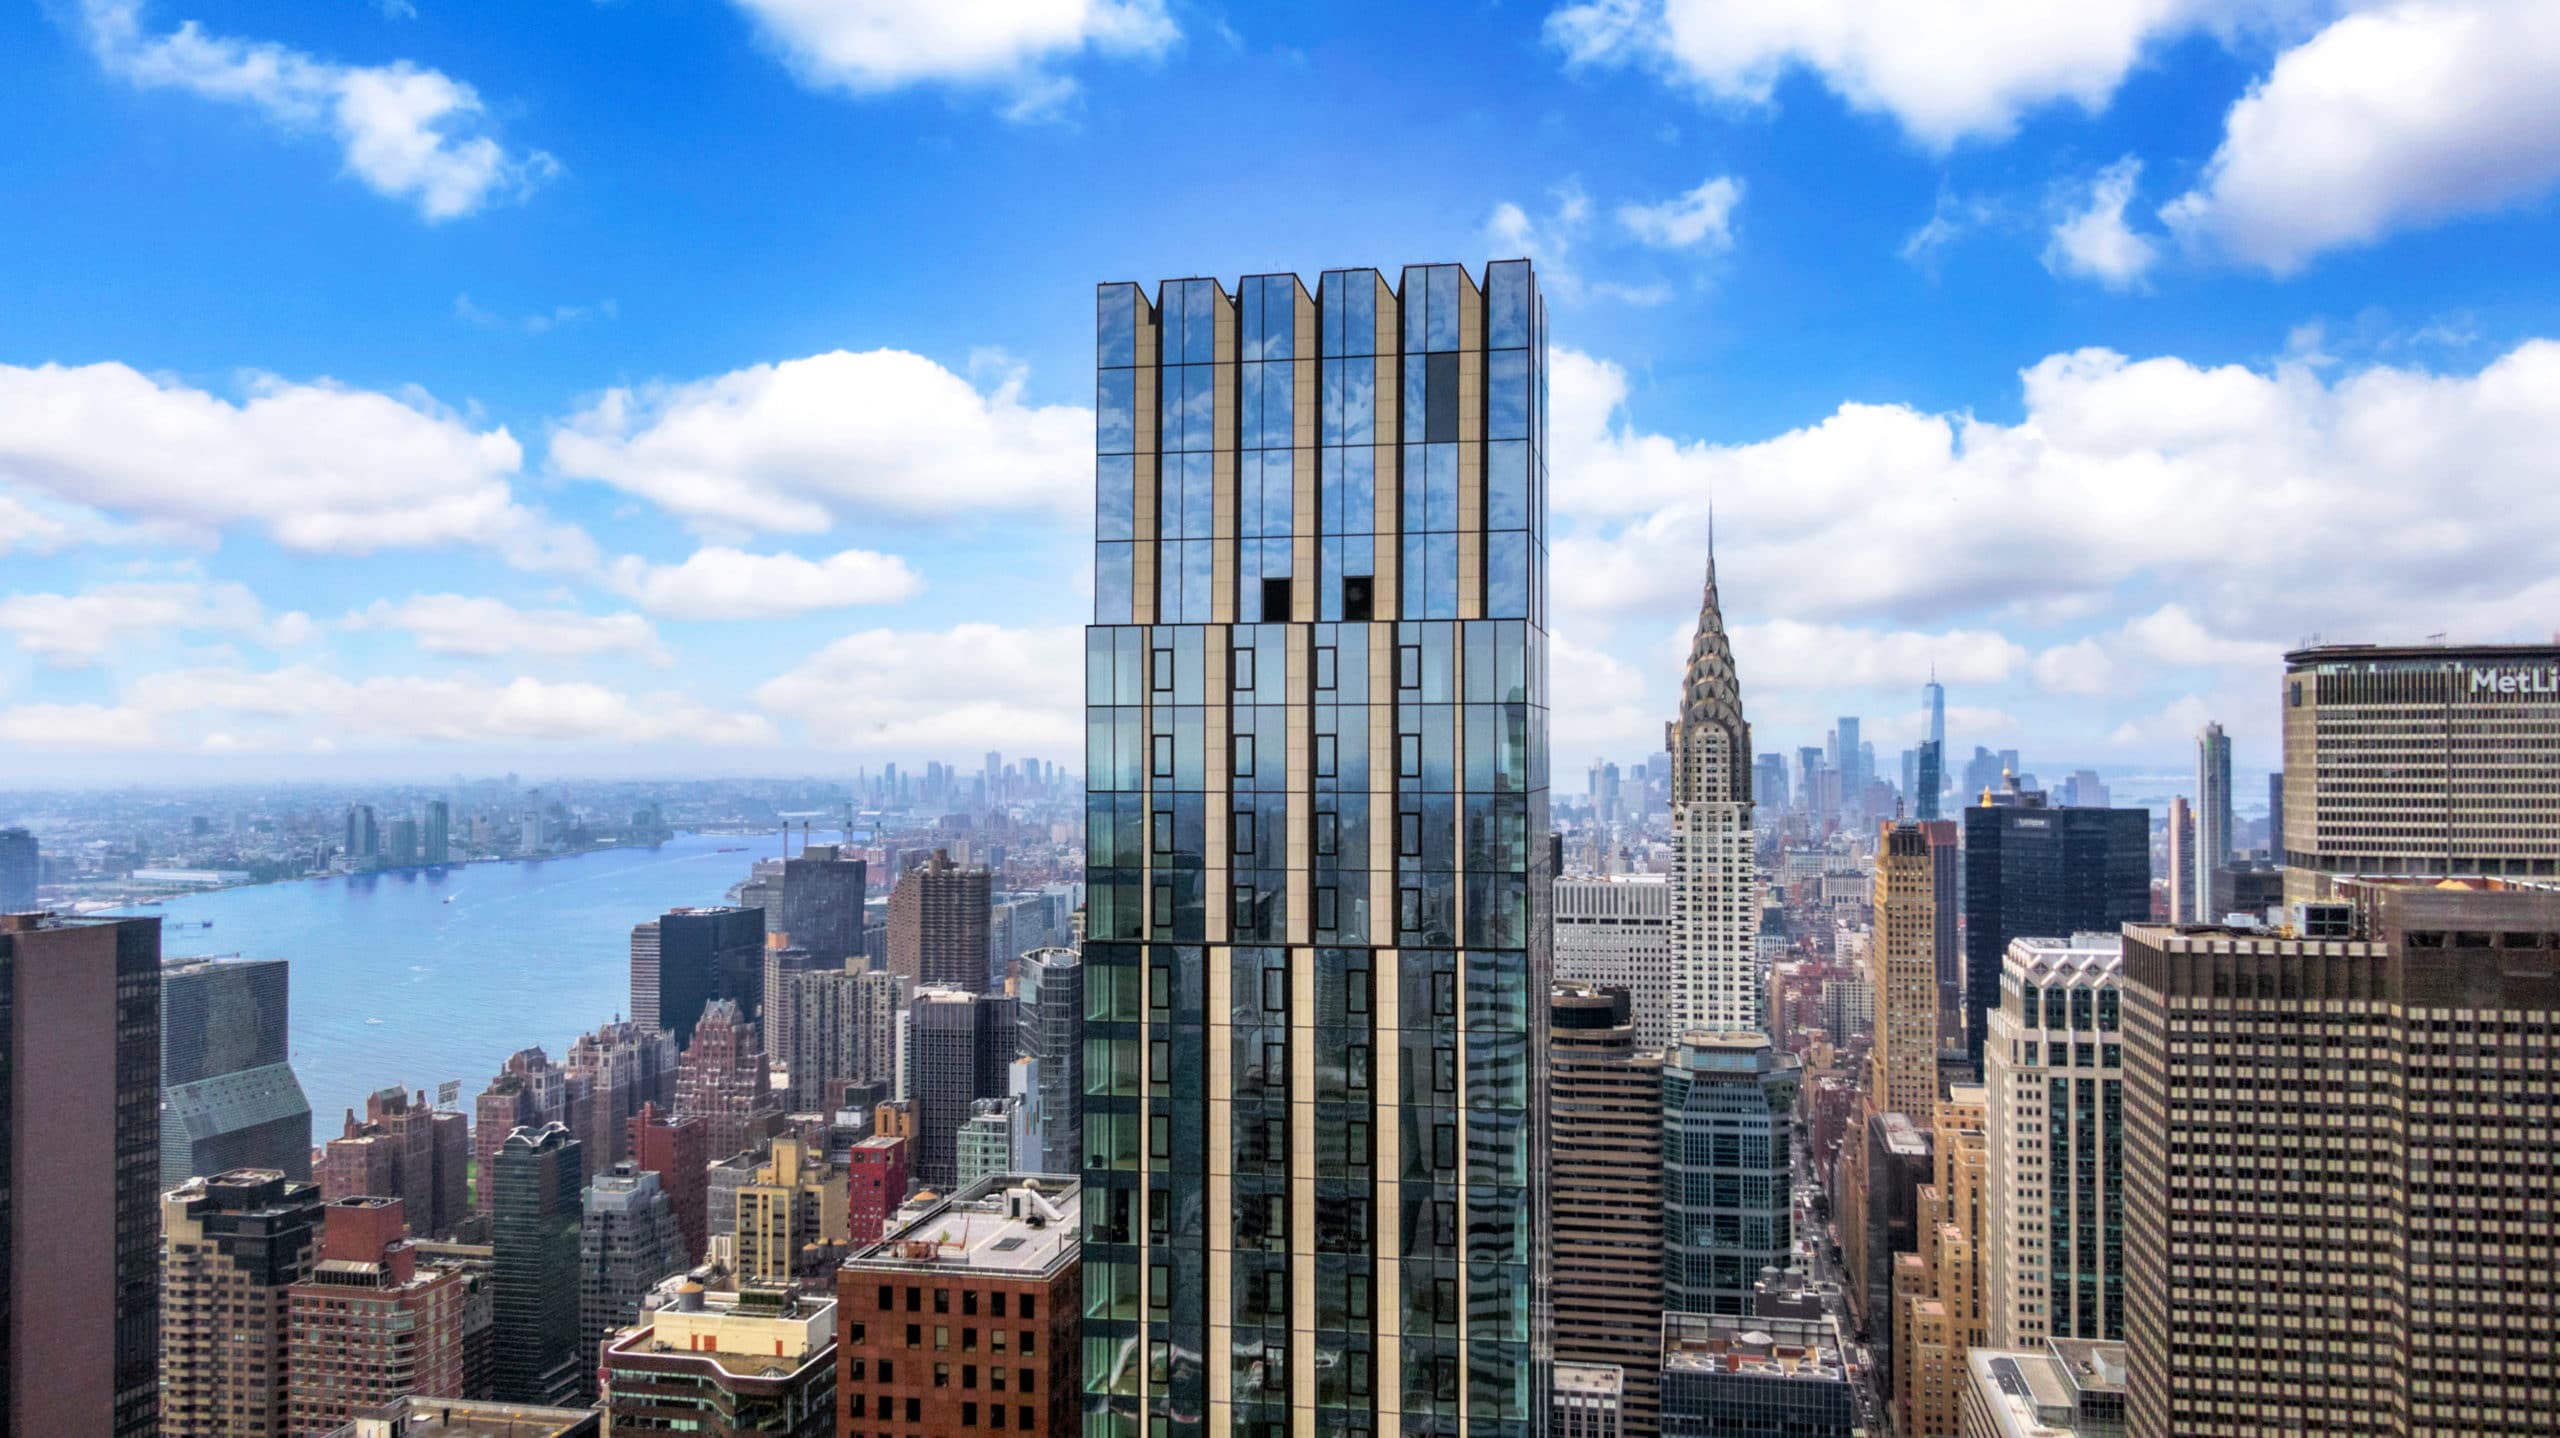 Birds eye view of The Centrale luxury condominiums in New York with city skyline in the background with blue skies.